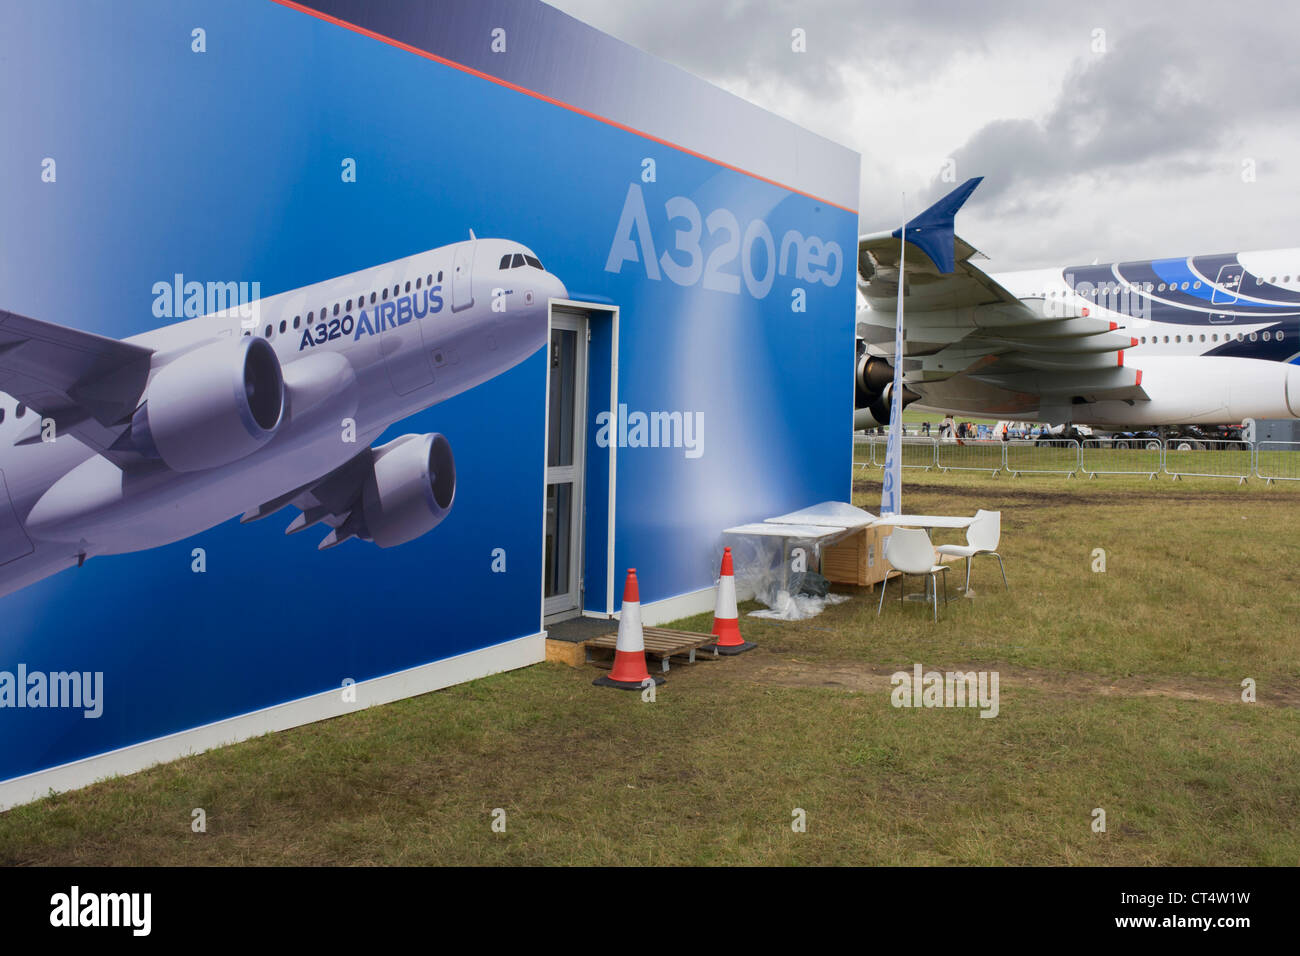 Landscape of a mural artwork of an A320 airliner outside one of the EADS company's chalets at the Farnborough Air Show. Stock Photo